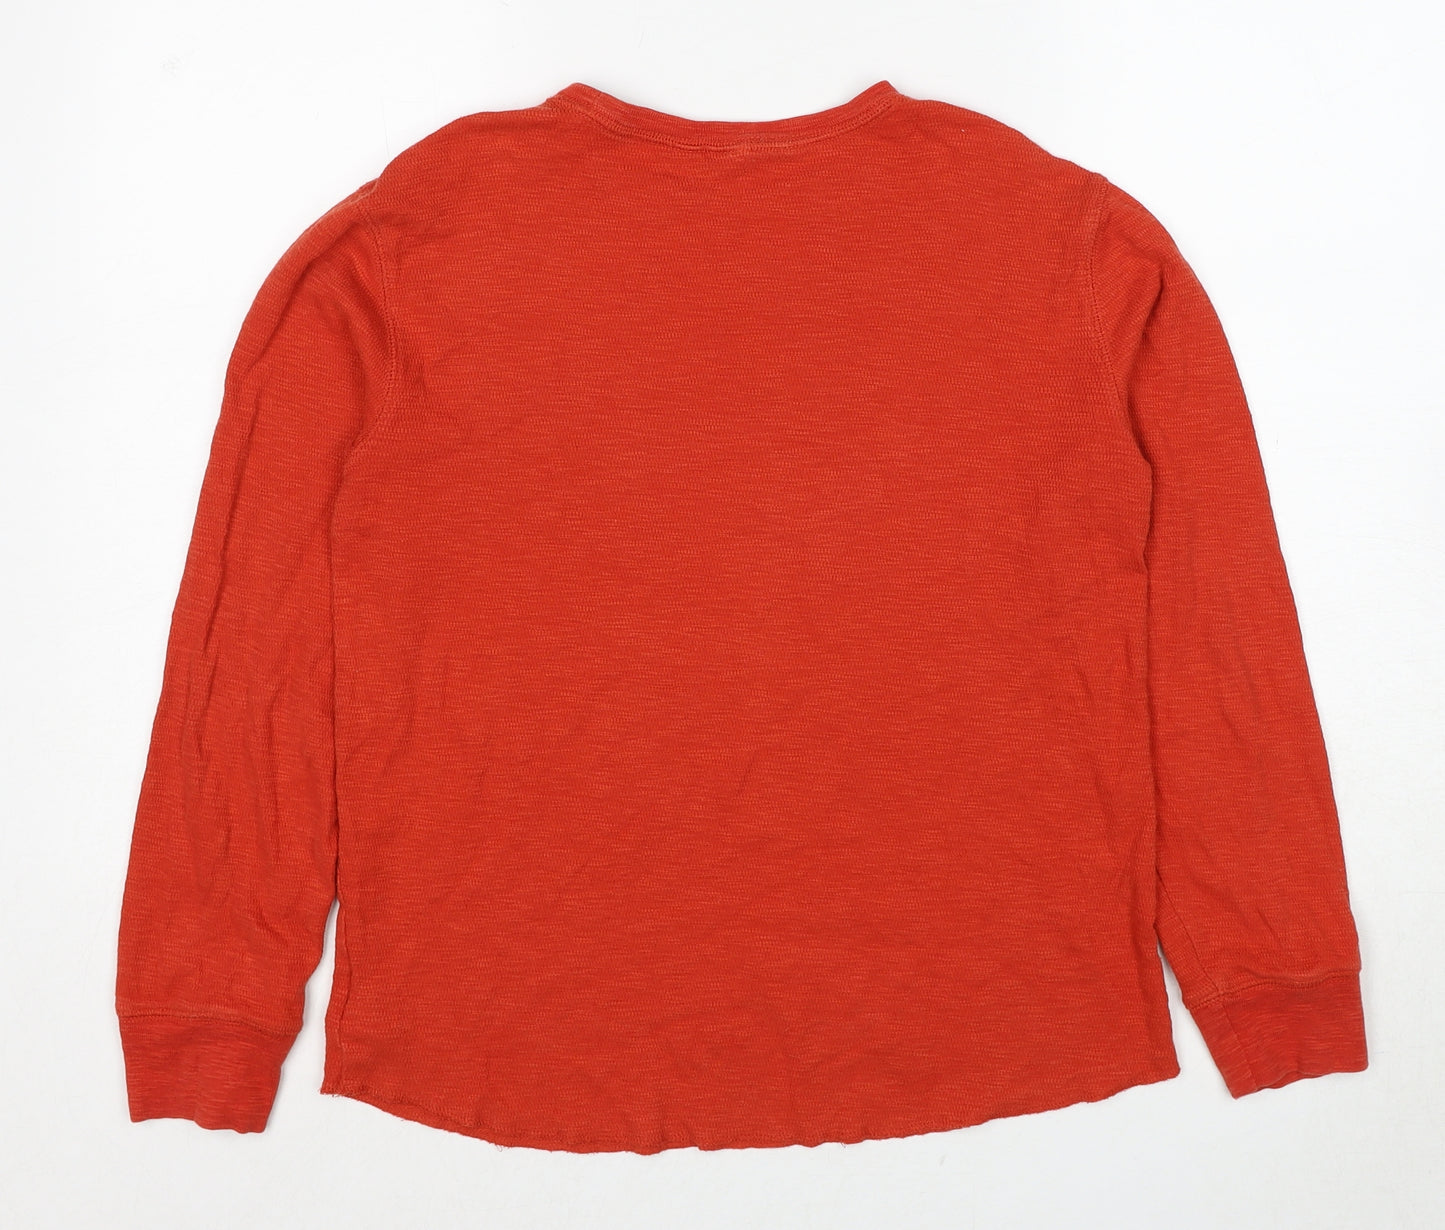 Gap Boys Red Cotton Pullover Sweatshirt Size 14-15 Years Pullover - Age 14-16 Years